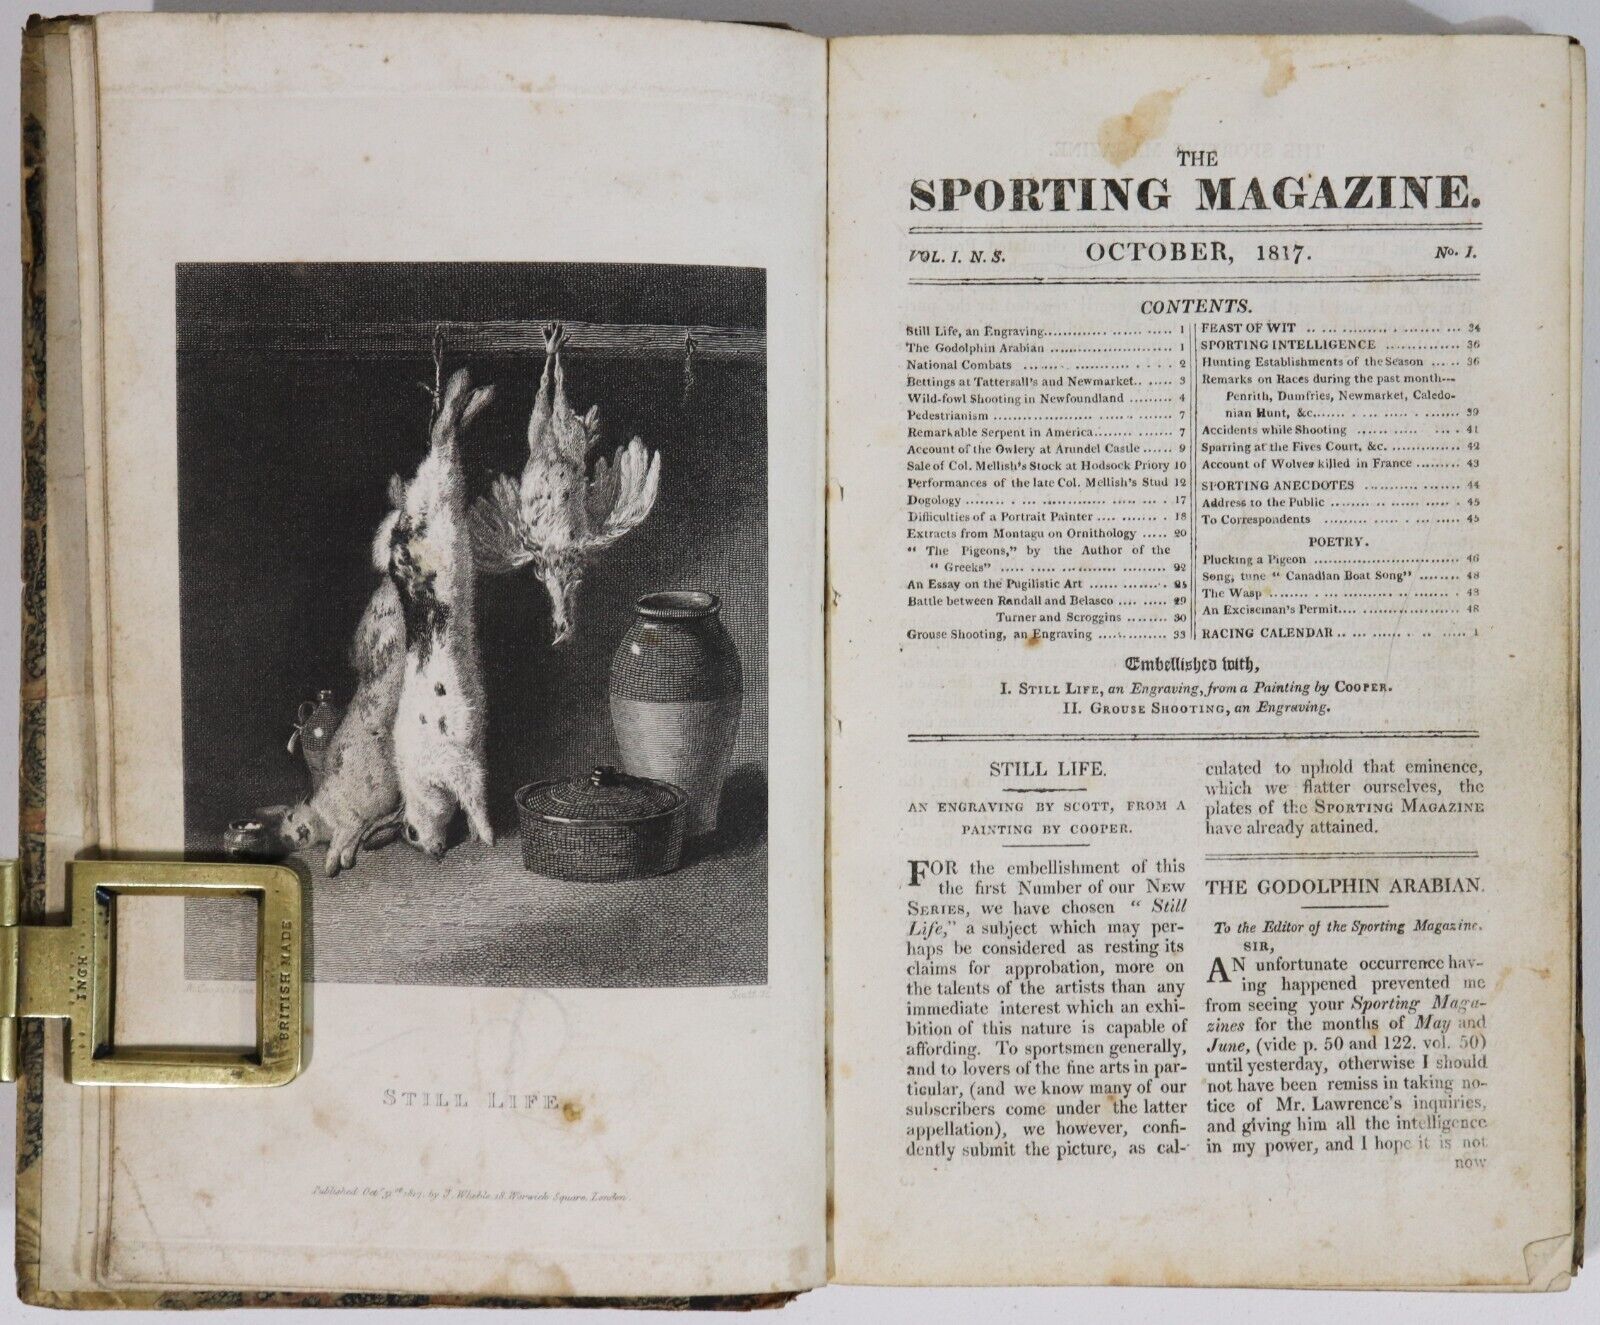 The Sporting Magazine: Monthly Calendar - 1818 - Antiquarian Sport History Book